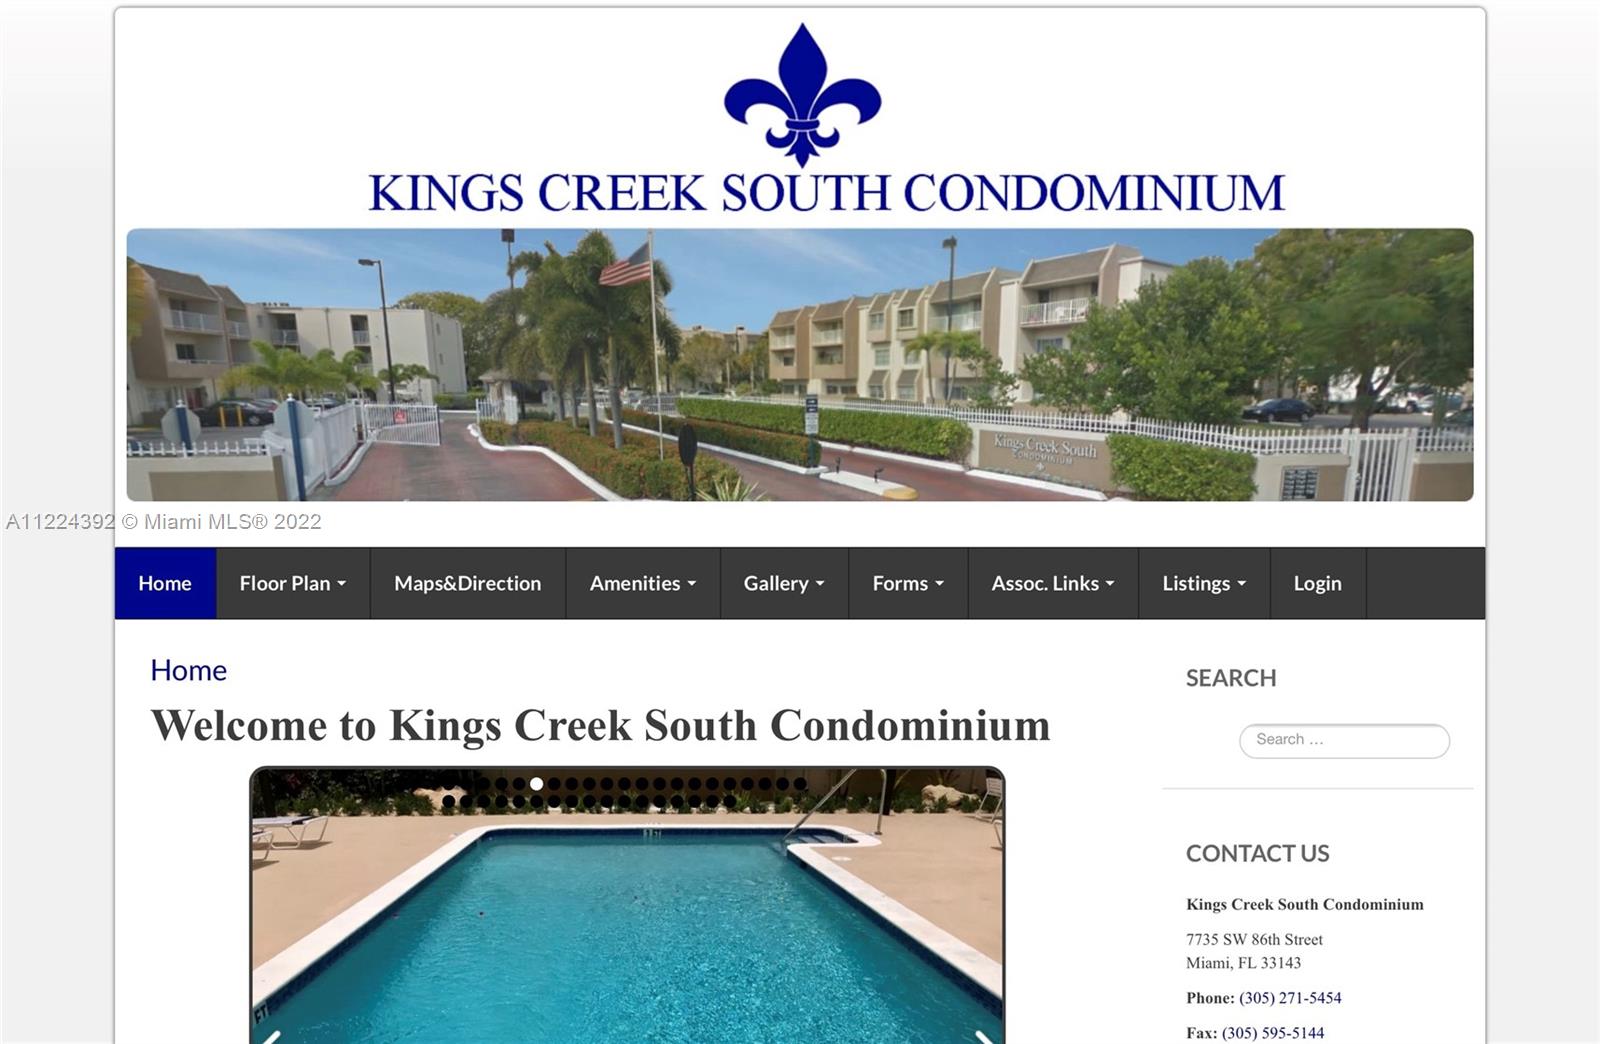 Come enjoy your new home at Kings Creek condos, right next to coveted DADELAND MALL, METRORAIL to get to downtown Miami and Brickell in minutes, meters away from the Palmetto Expressway.  Enjoy brand new fitness center, 2 pools, jacuzzi, tennis court, and bbq area. Condo also has storage room on first floor. Ample parking for owners and guests. Plan your unique design in your comfy condo.